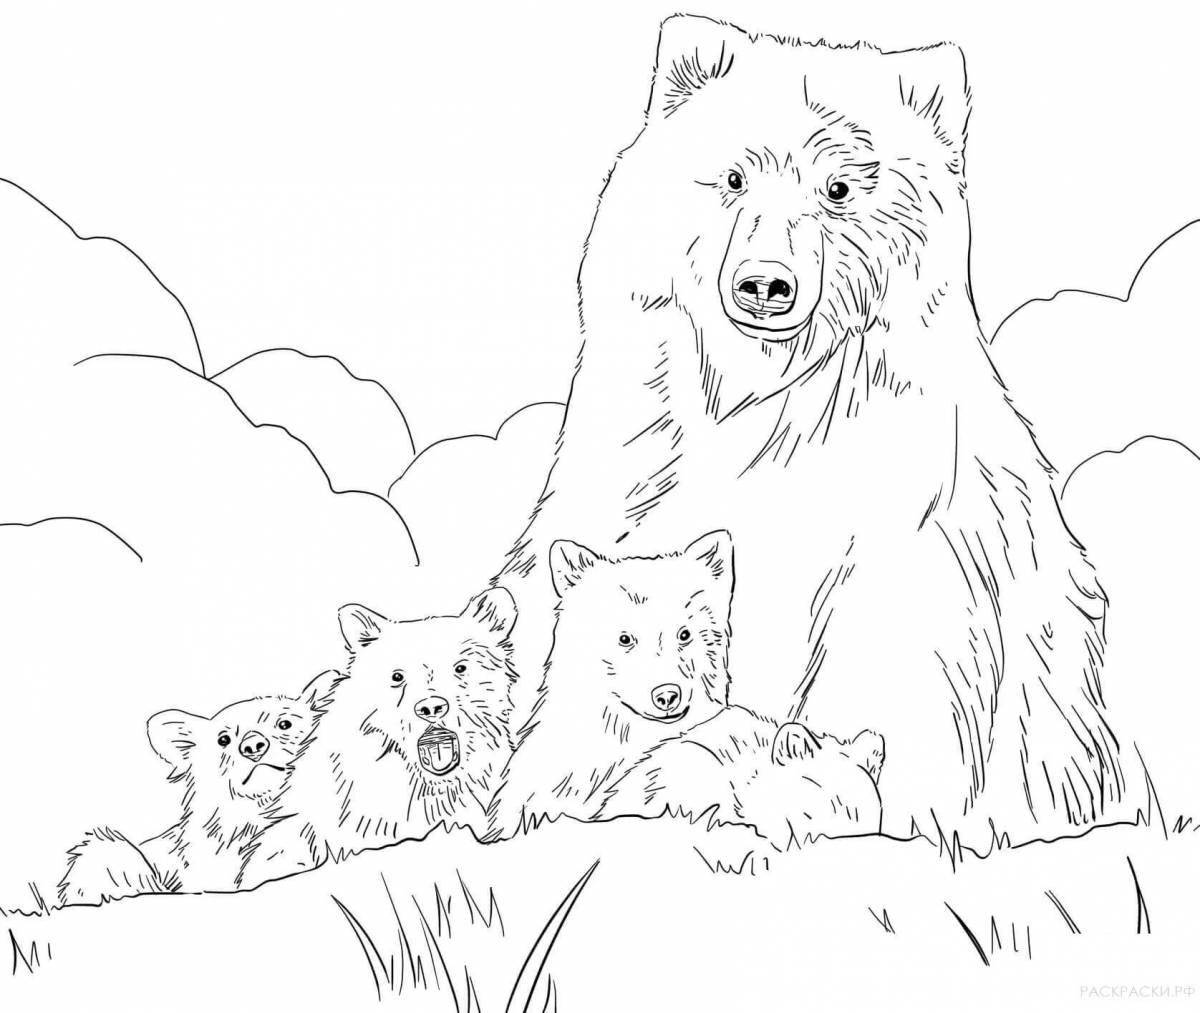 Coloring page for a family of bears on a walk